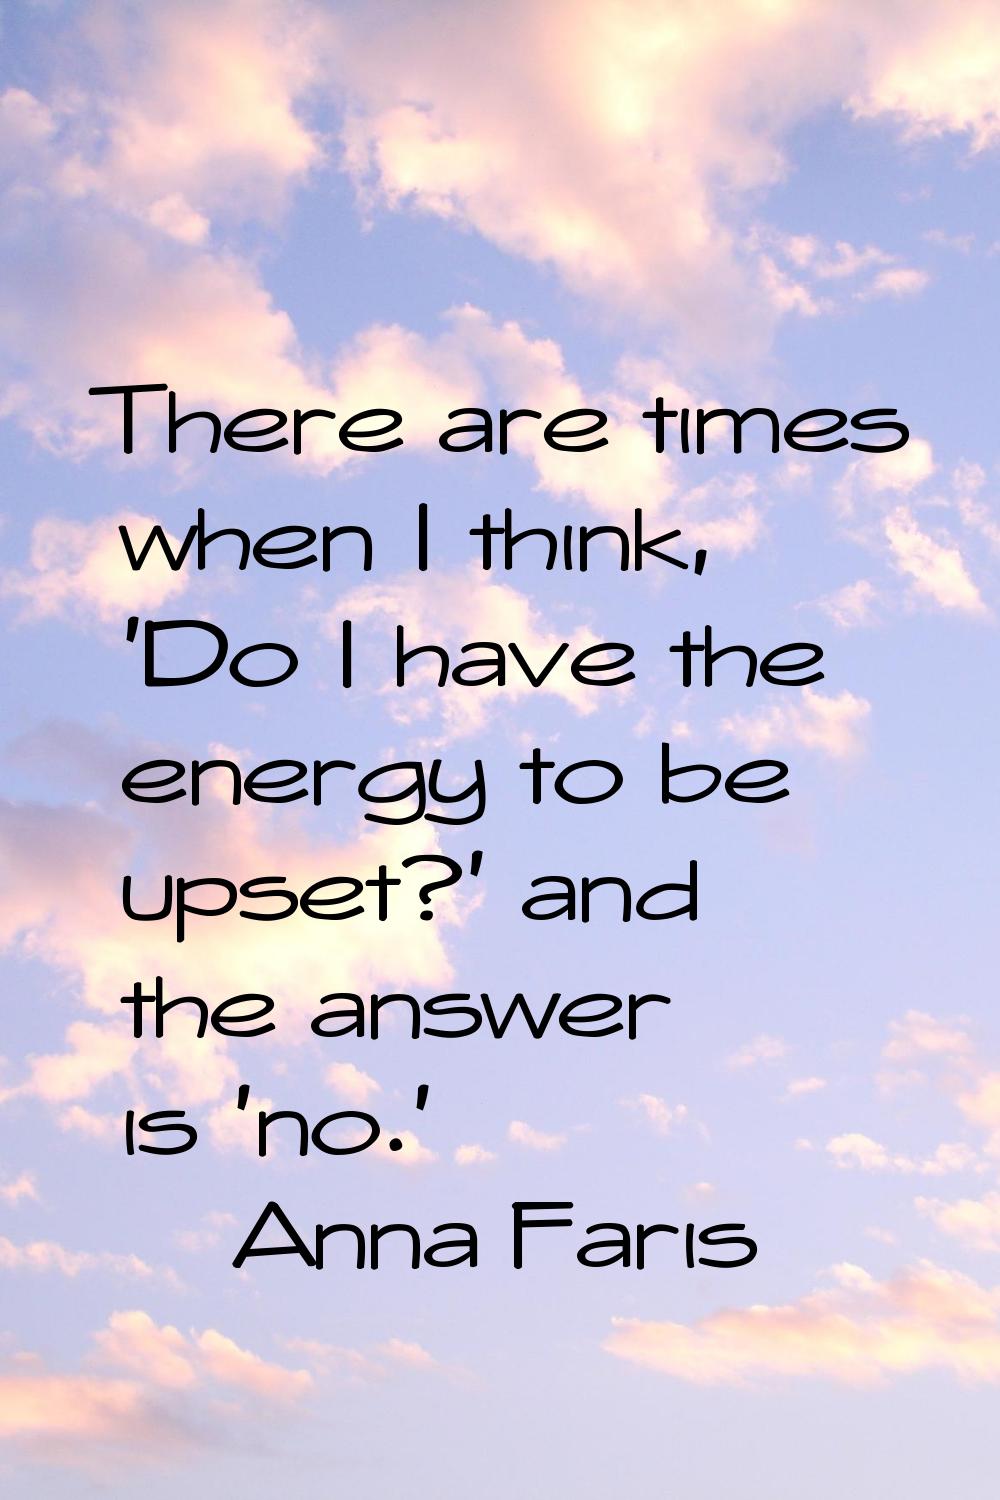 There are times when I think, 'Do I have the energy to be upset?' and the answer is 'no.'